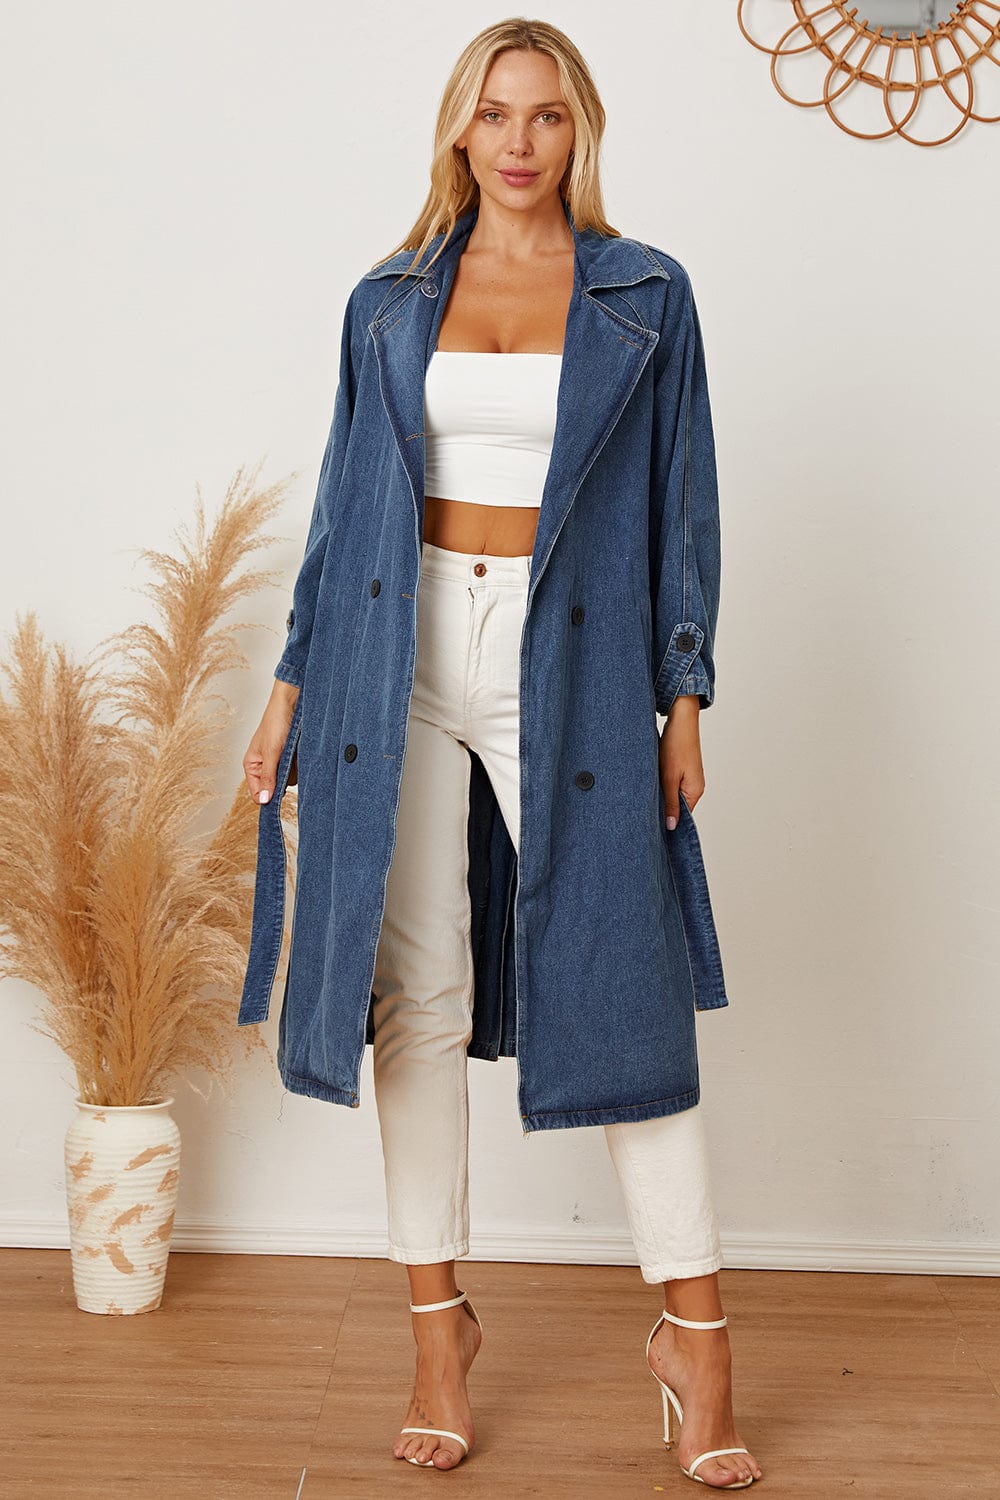 The802Gypsy coats and jackets Medium / S GYPSY-Double-Breasted Belted Longline Denim Jacket